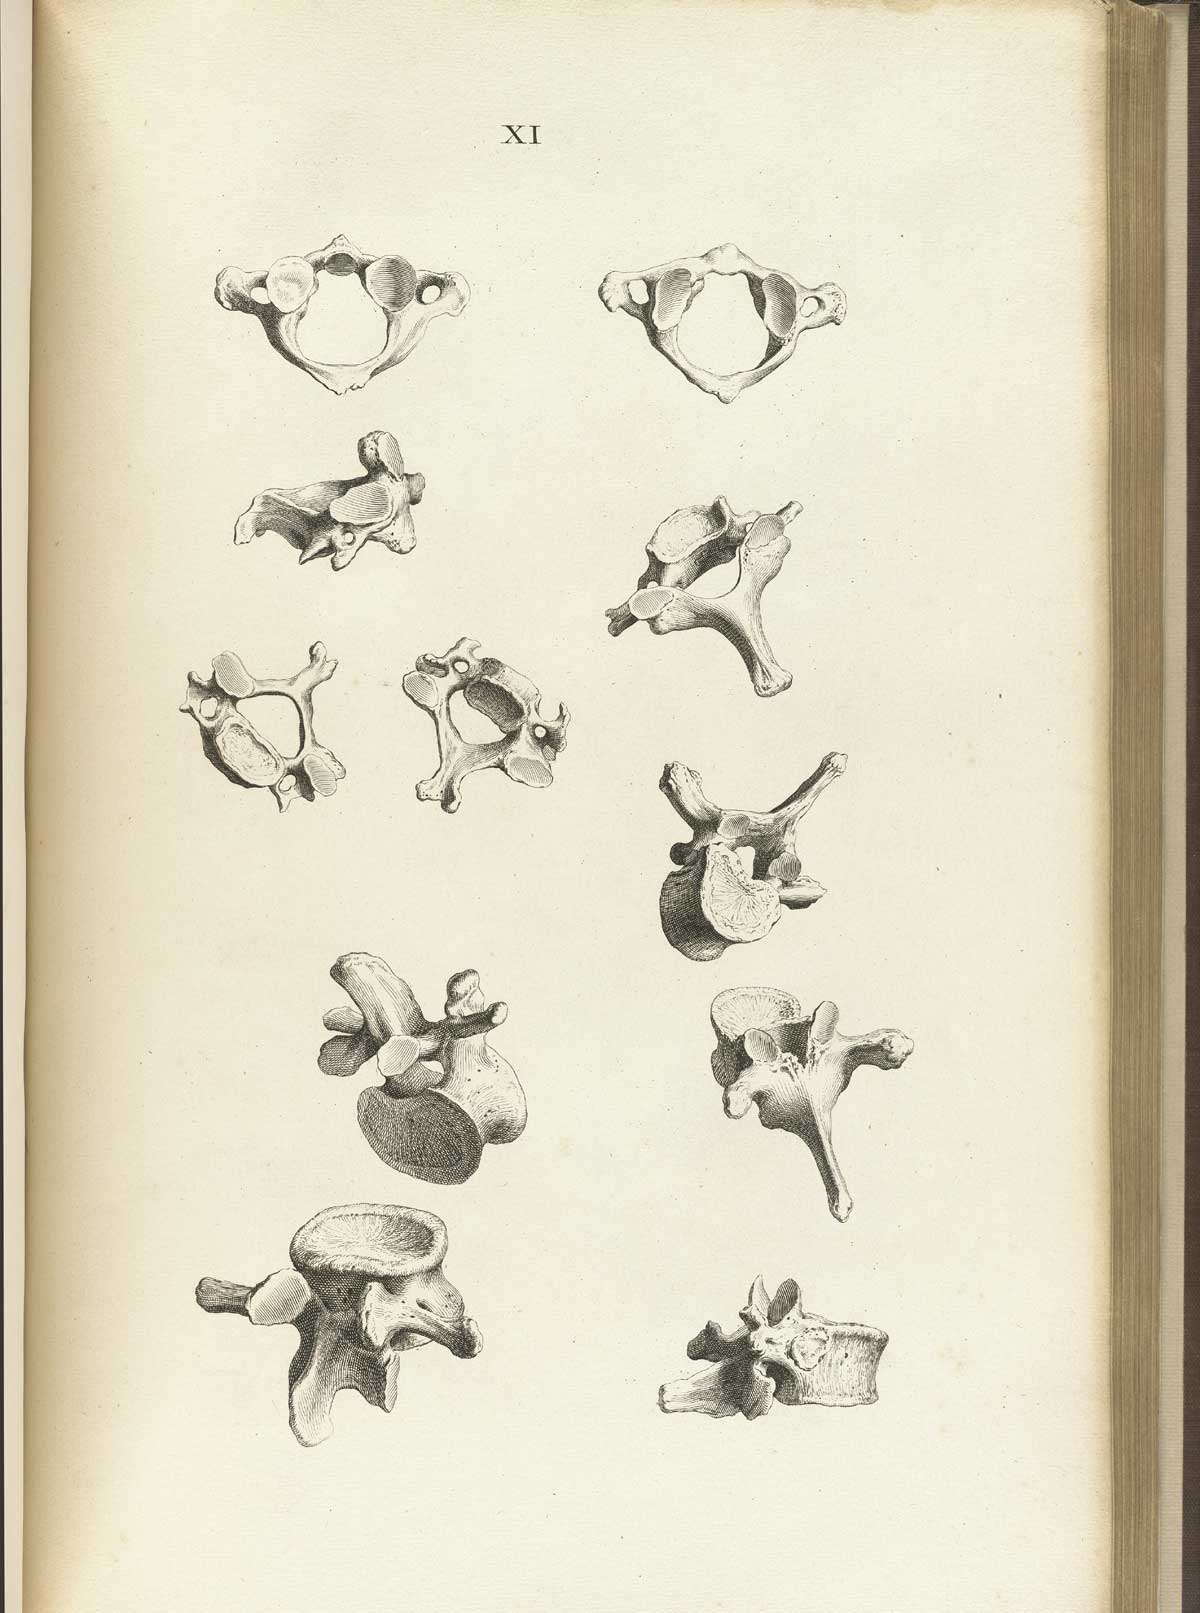 Engraving of eleven vertebrae viewed from different angles giving details of their different processes, from William Cheselden’s Osteographia, NLM Call no.: WZ 260 C499o 1733.